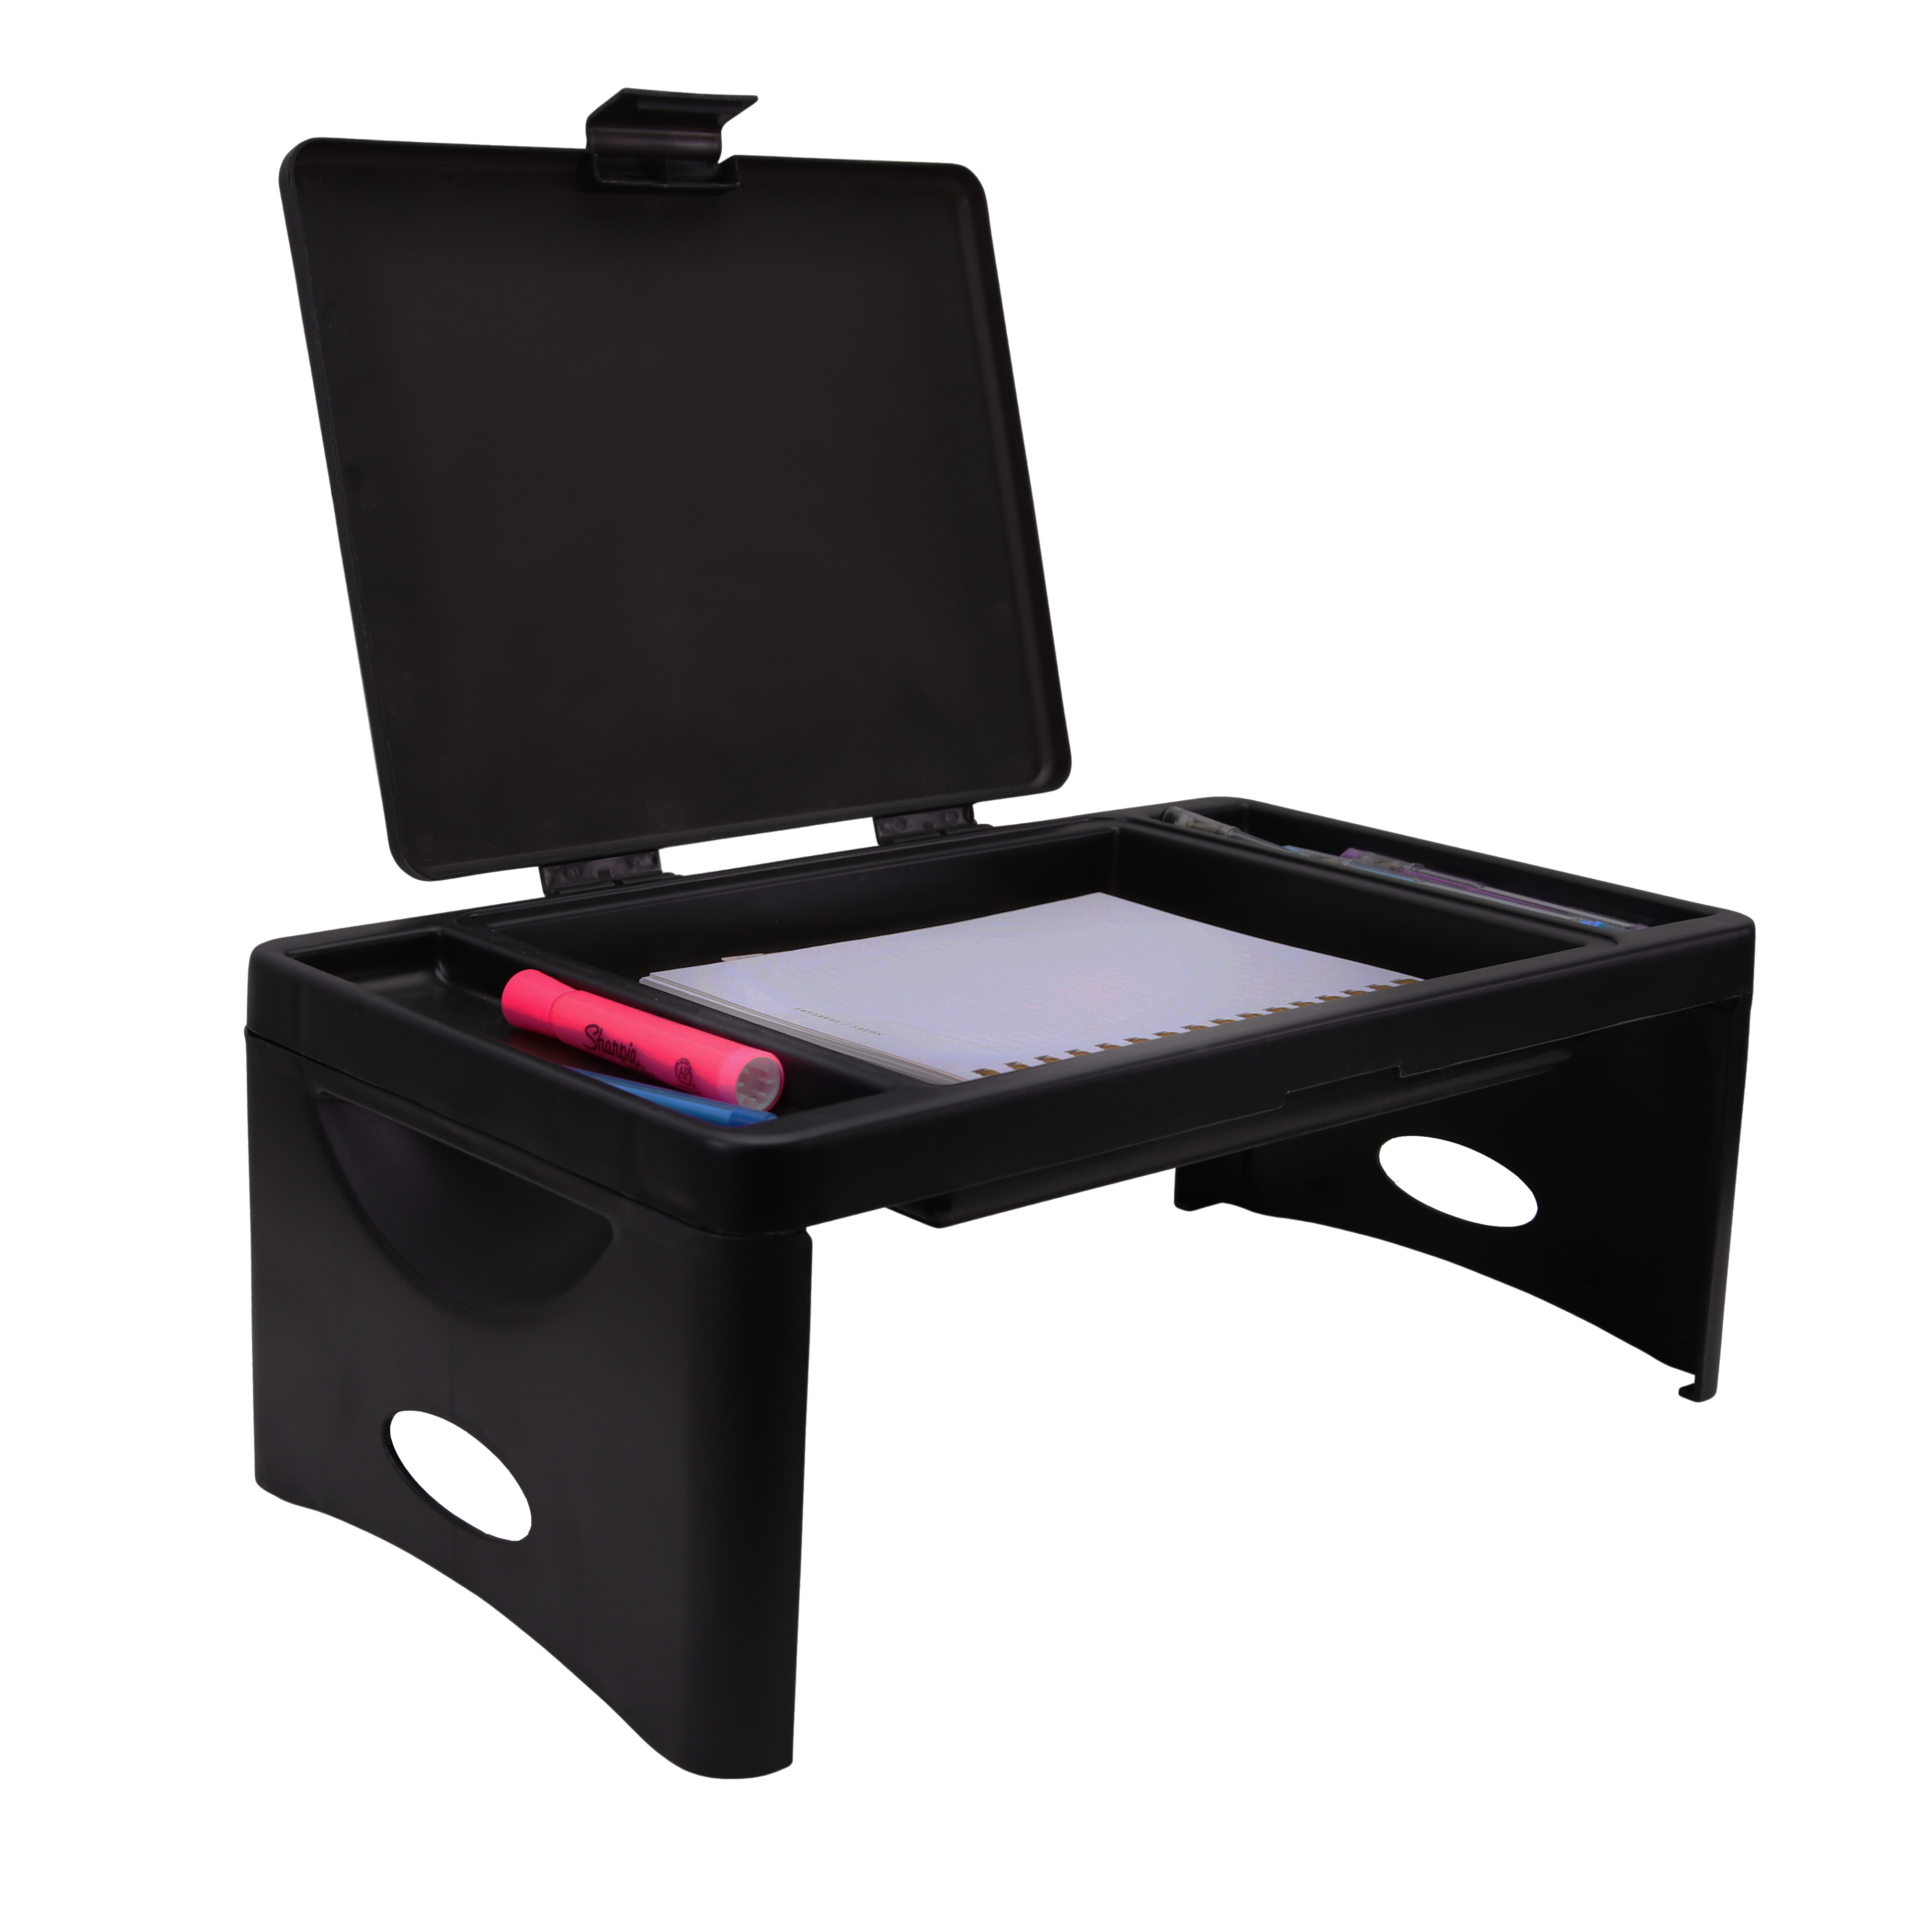 Foldable Lap Desk with Storage Pocket. Perfect use for Laptops, Travel, Breakfast in Bed, Gaming and Much More! Great for Kids and Teens! - image 1 of 6